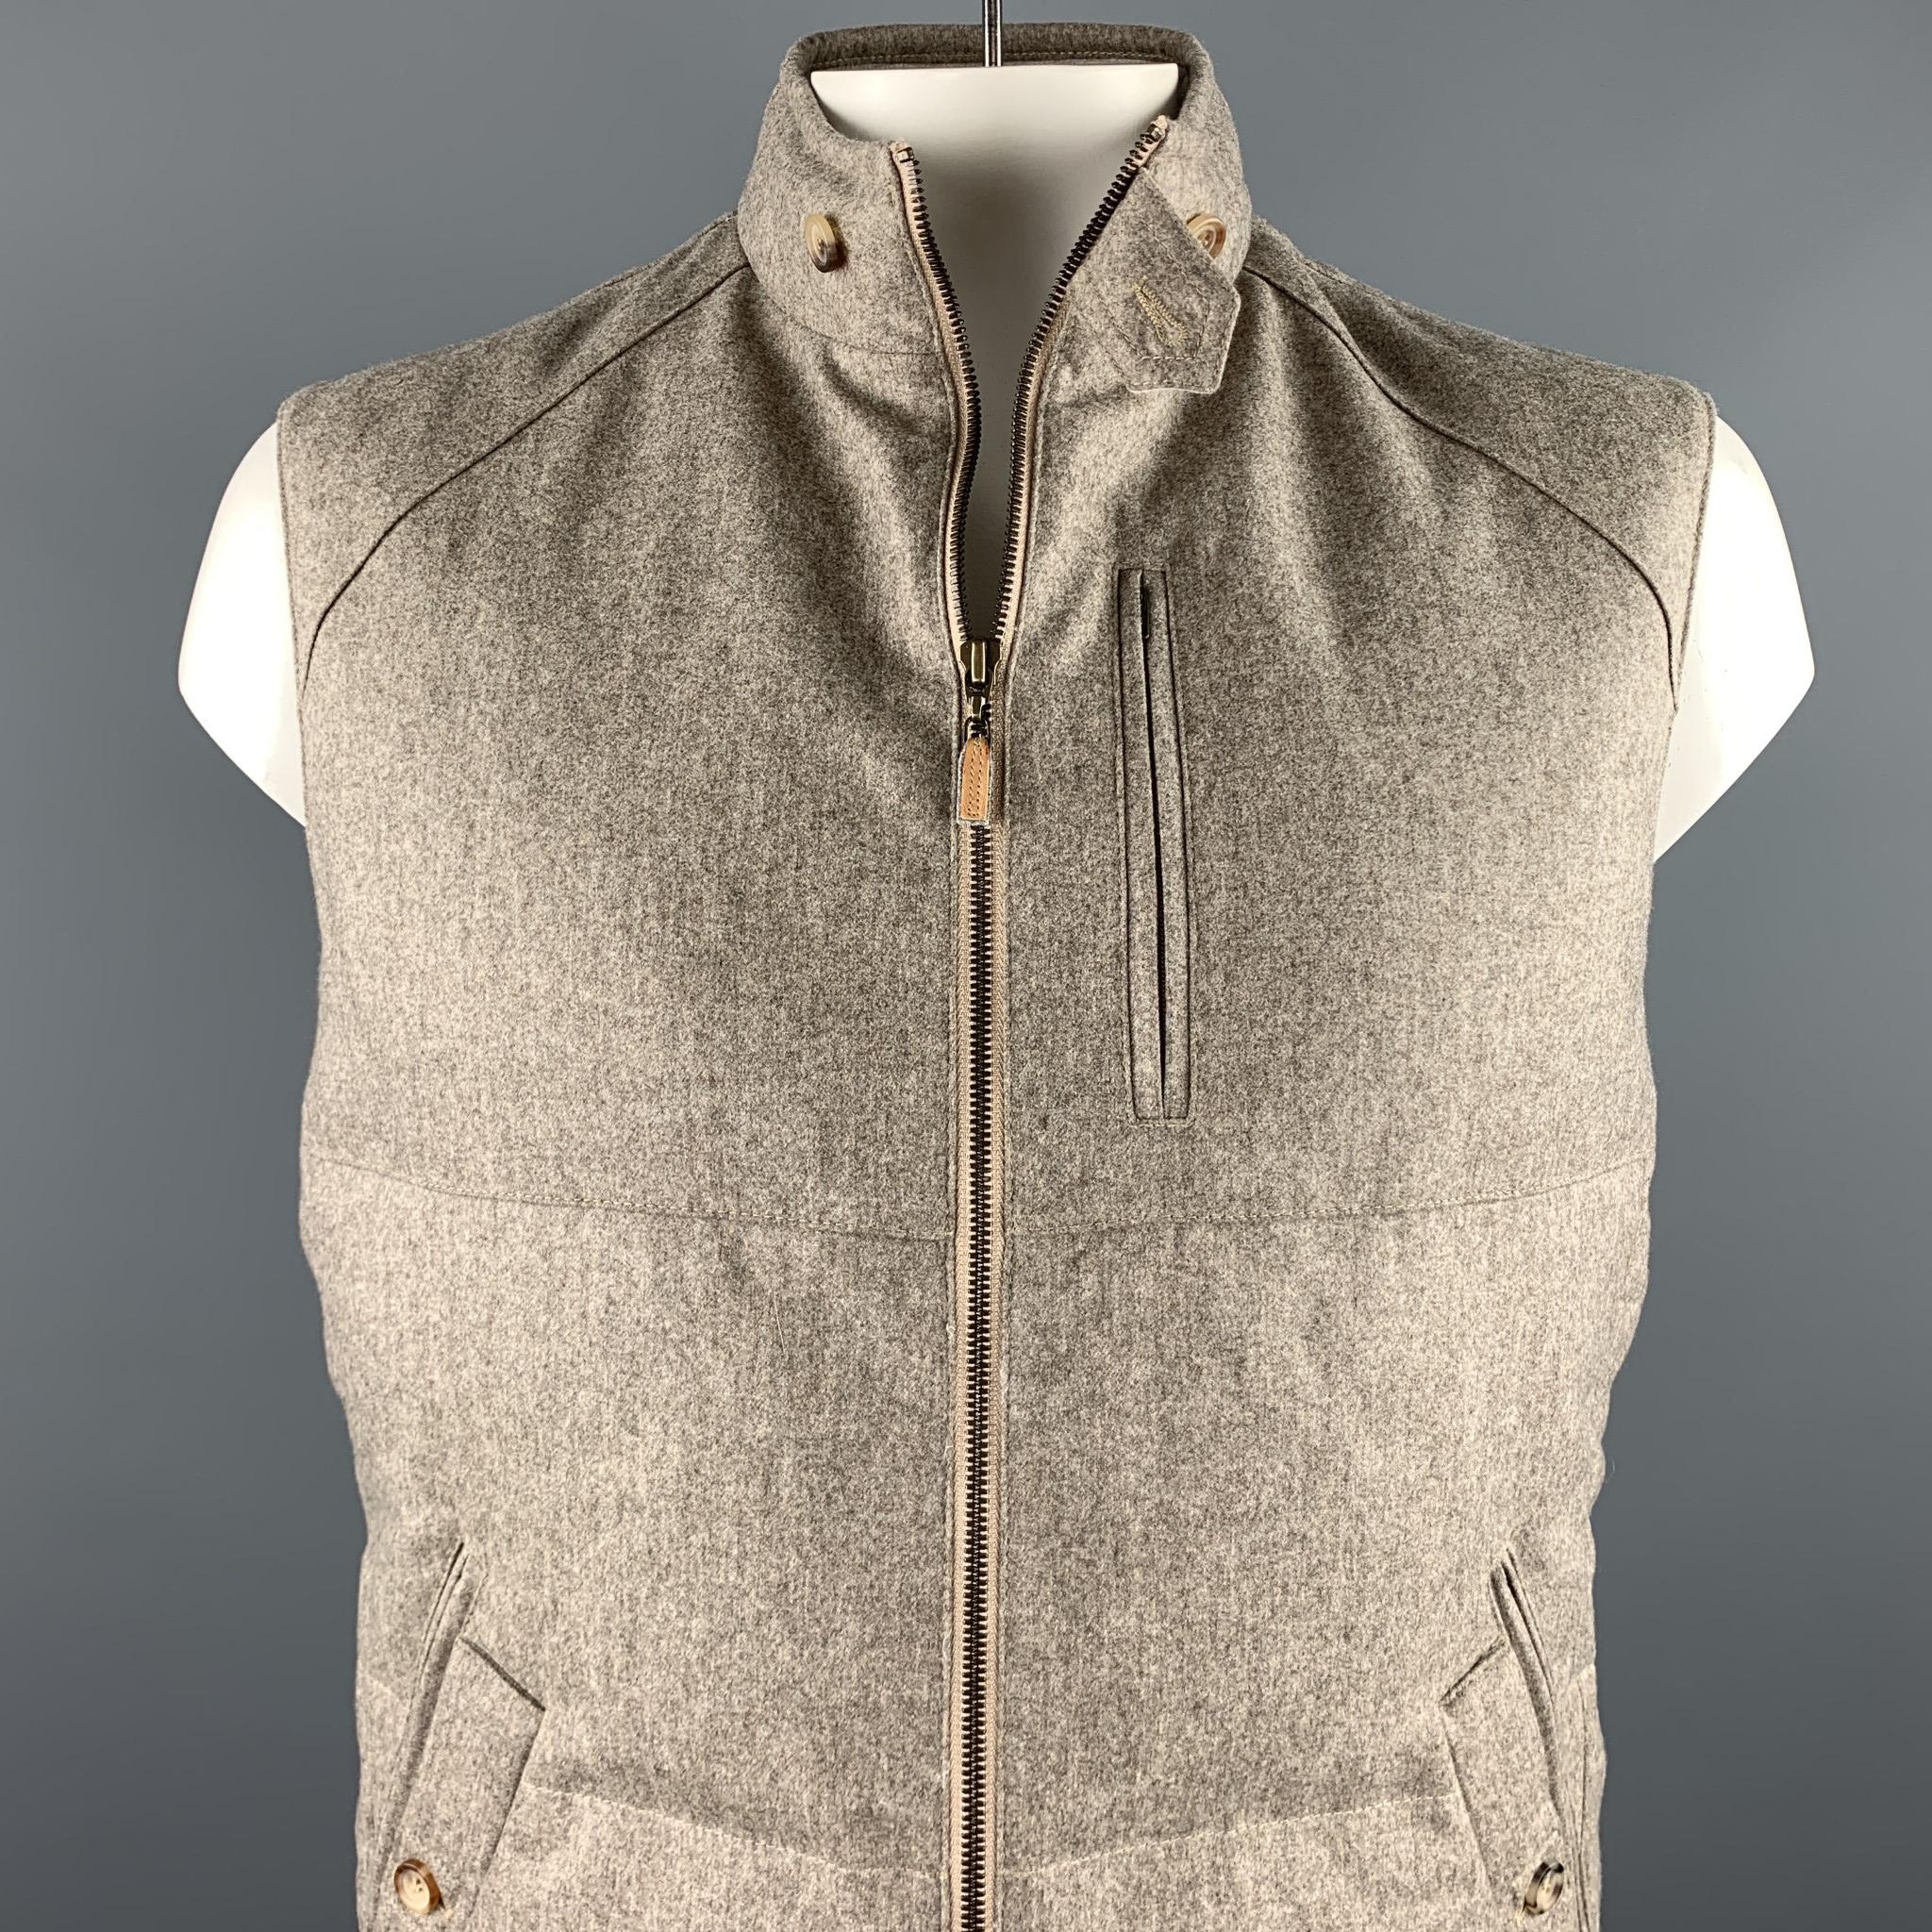 BRUNELLO CUCINELLI vest comes in a oatmeal quilted wool / cashmere featuring a buttoned collar, inner pockets, front zipper pockets, stitching details, and a zip up closure. Made in Italy.

New With Tags.
Marked: XL

Measurements:

Shoulder: 19